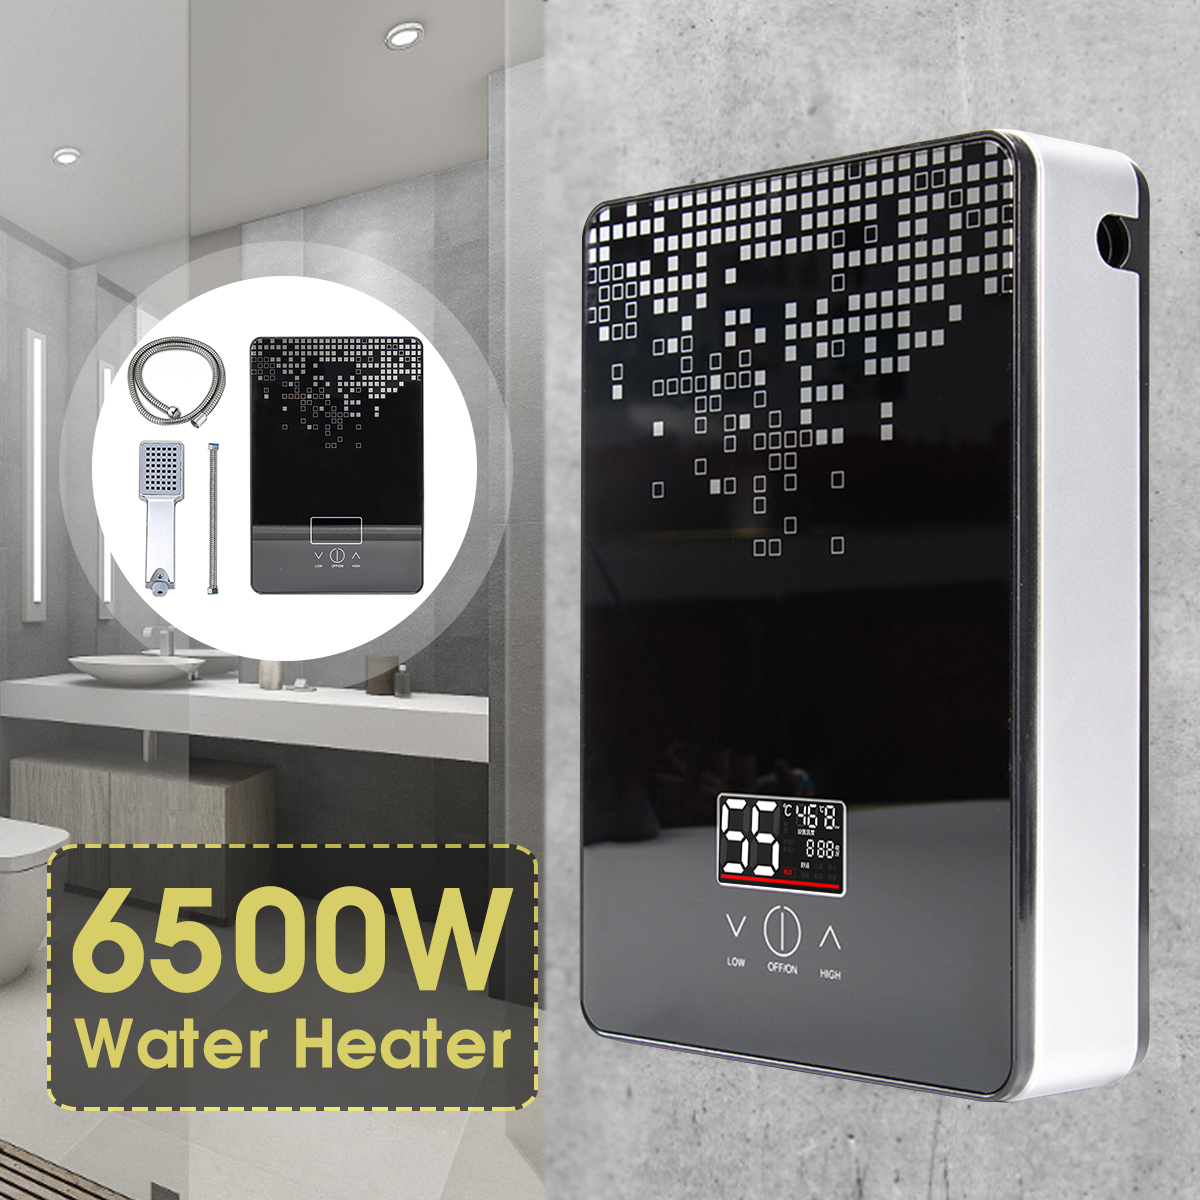 6500W-220V-Mini-Electric-Water-Heater-Instant-Tankless-Shower-Kitchen-Faucet-1588538-1